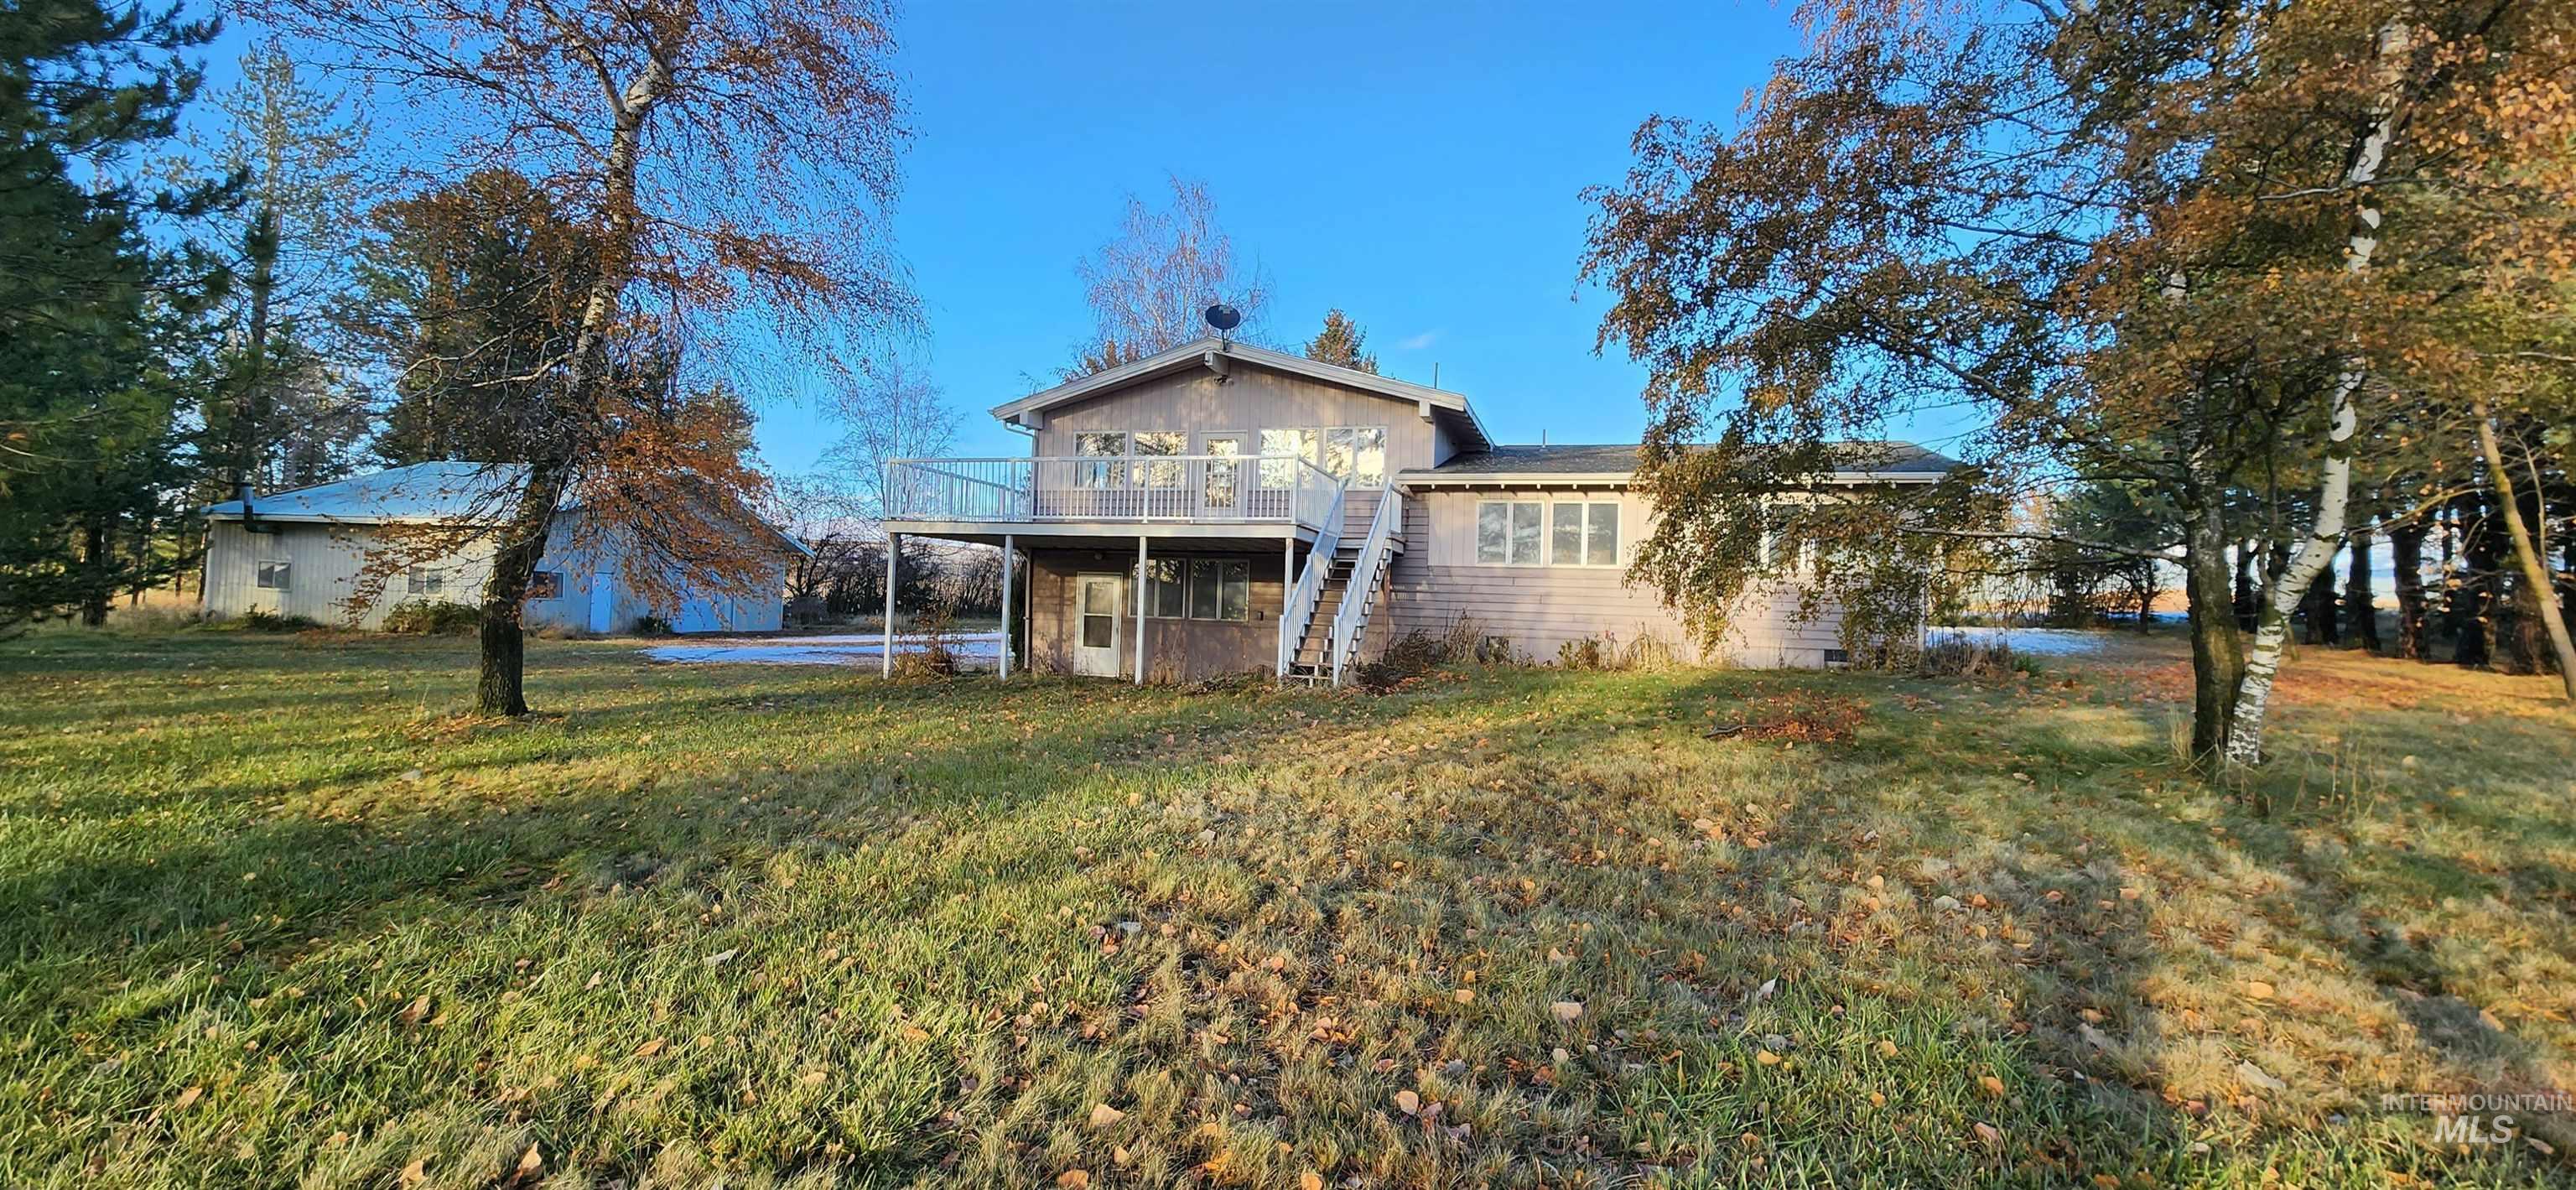 1321 O'Donnell Rd, Moscow, Idaho 83843, 3 Bedrooms, 1 Bathroom, Residential For Sale, Price $539,000, 98864165